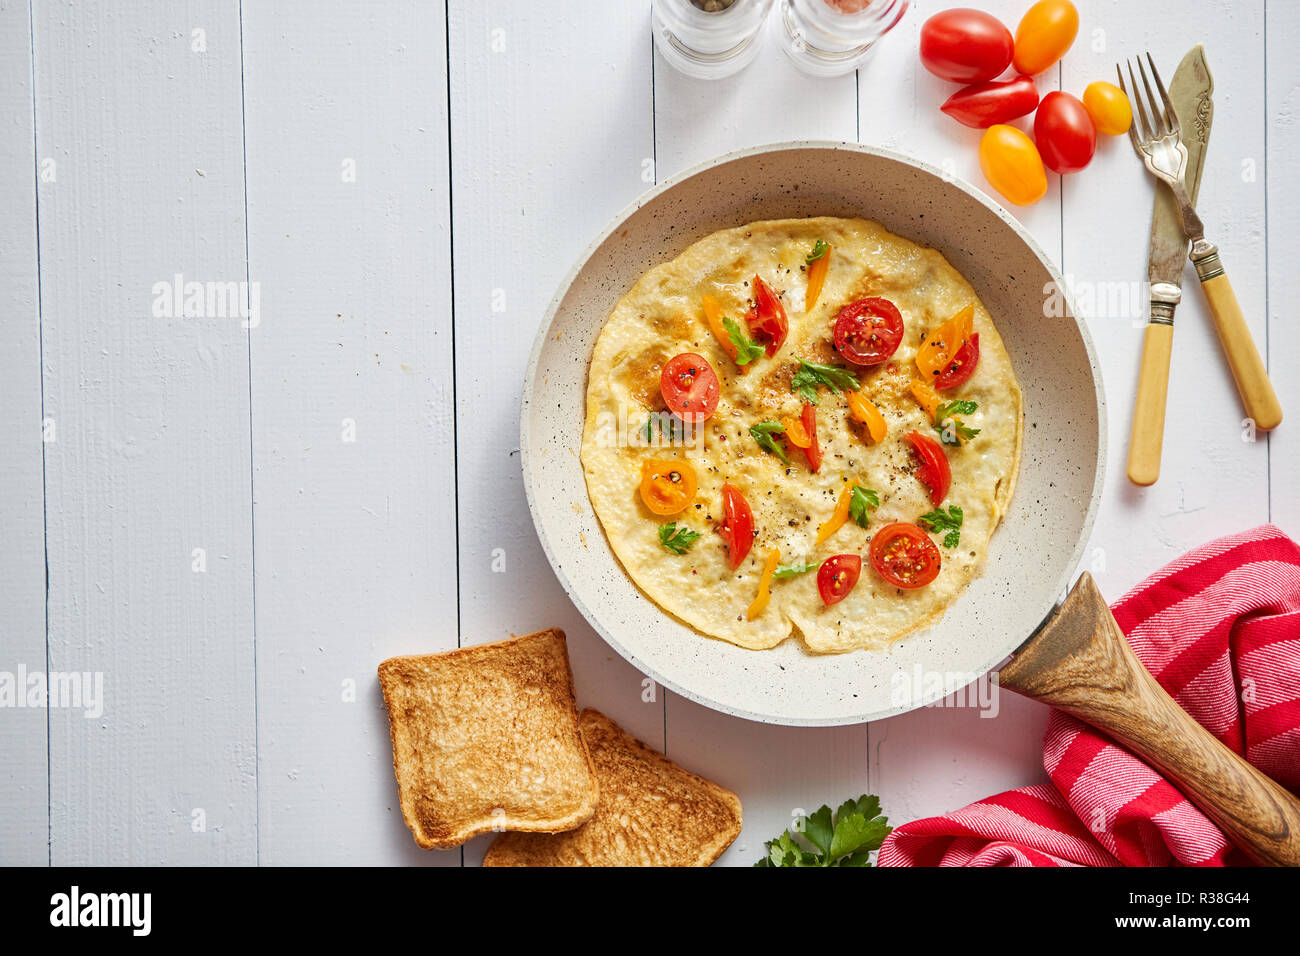 Delicious homemade egg omelette with tomatoes and parsley Stock Photo